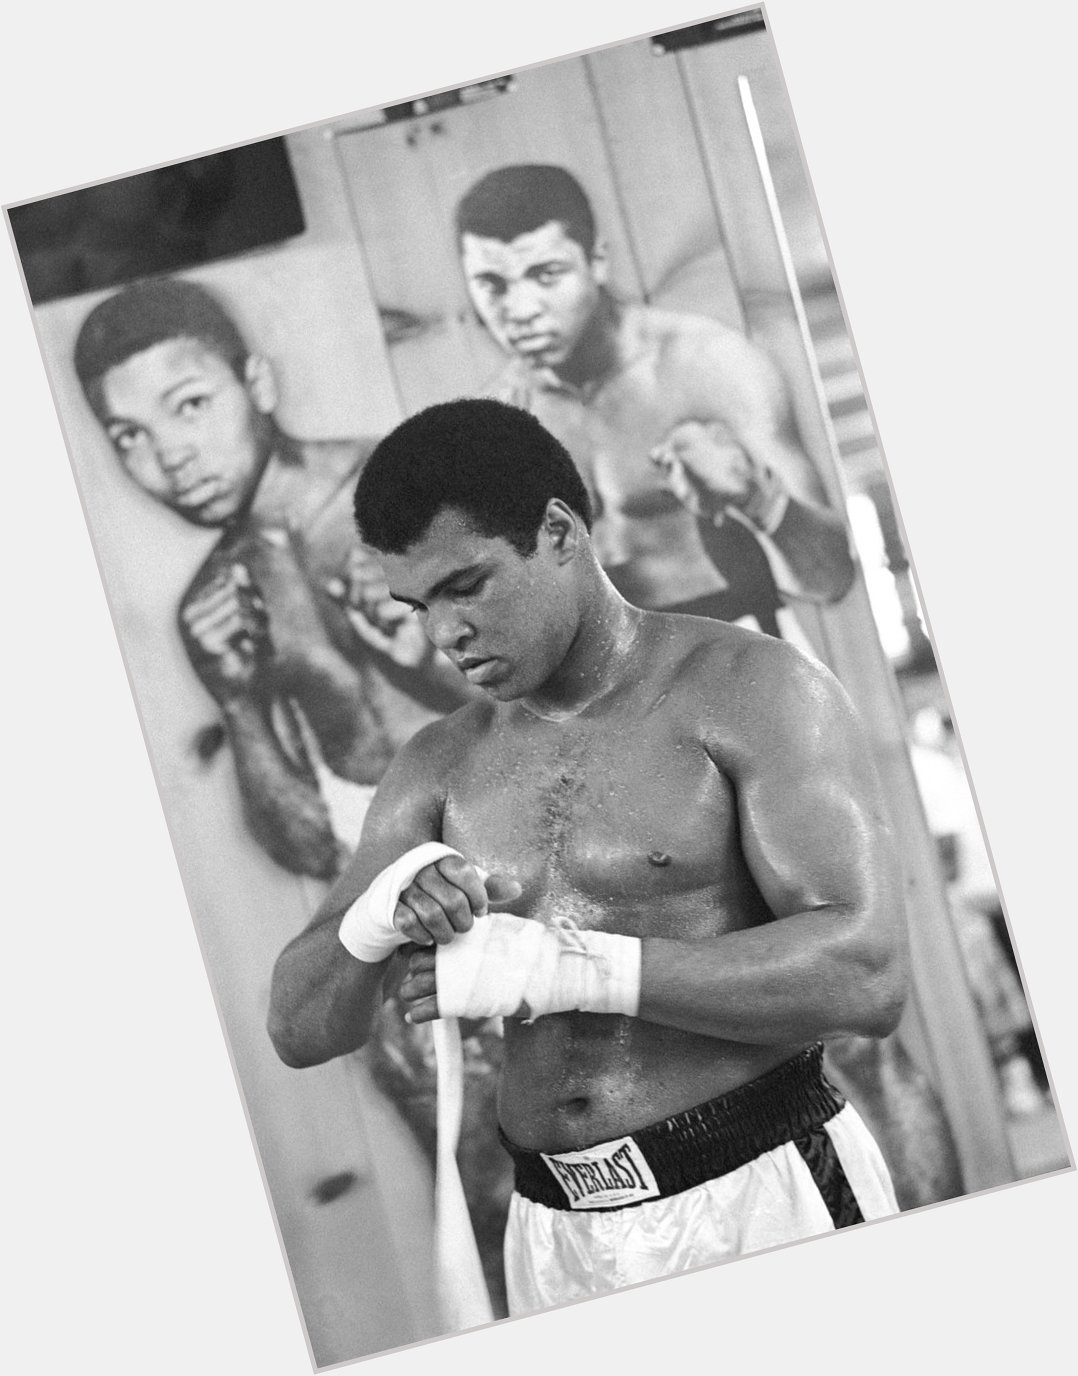 Happy Birthday to The Greatest, Muhammad Ali!  He would have turned 79 years old today. 